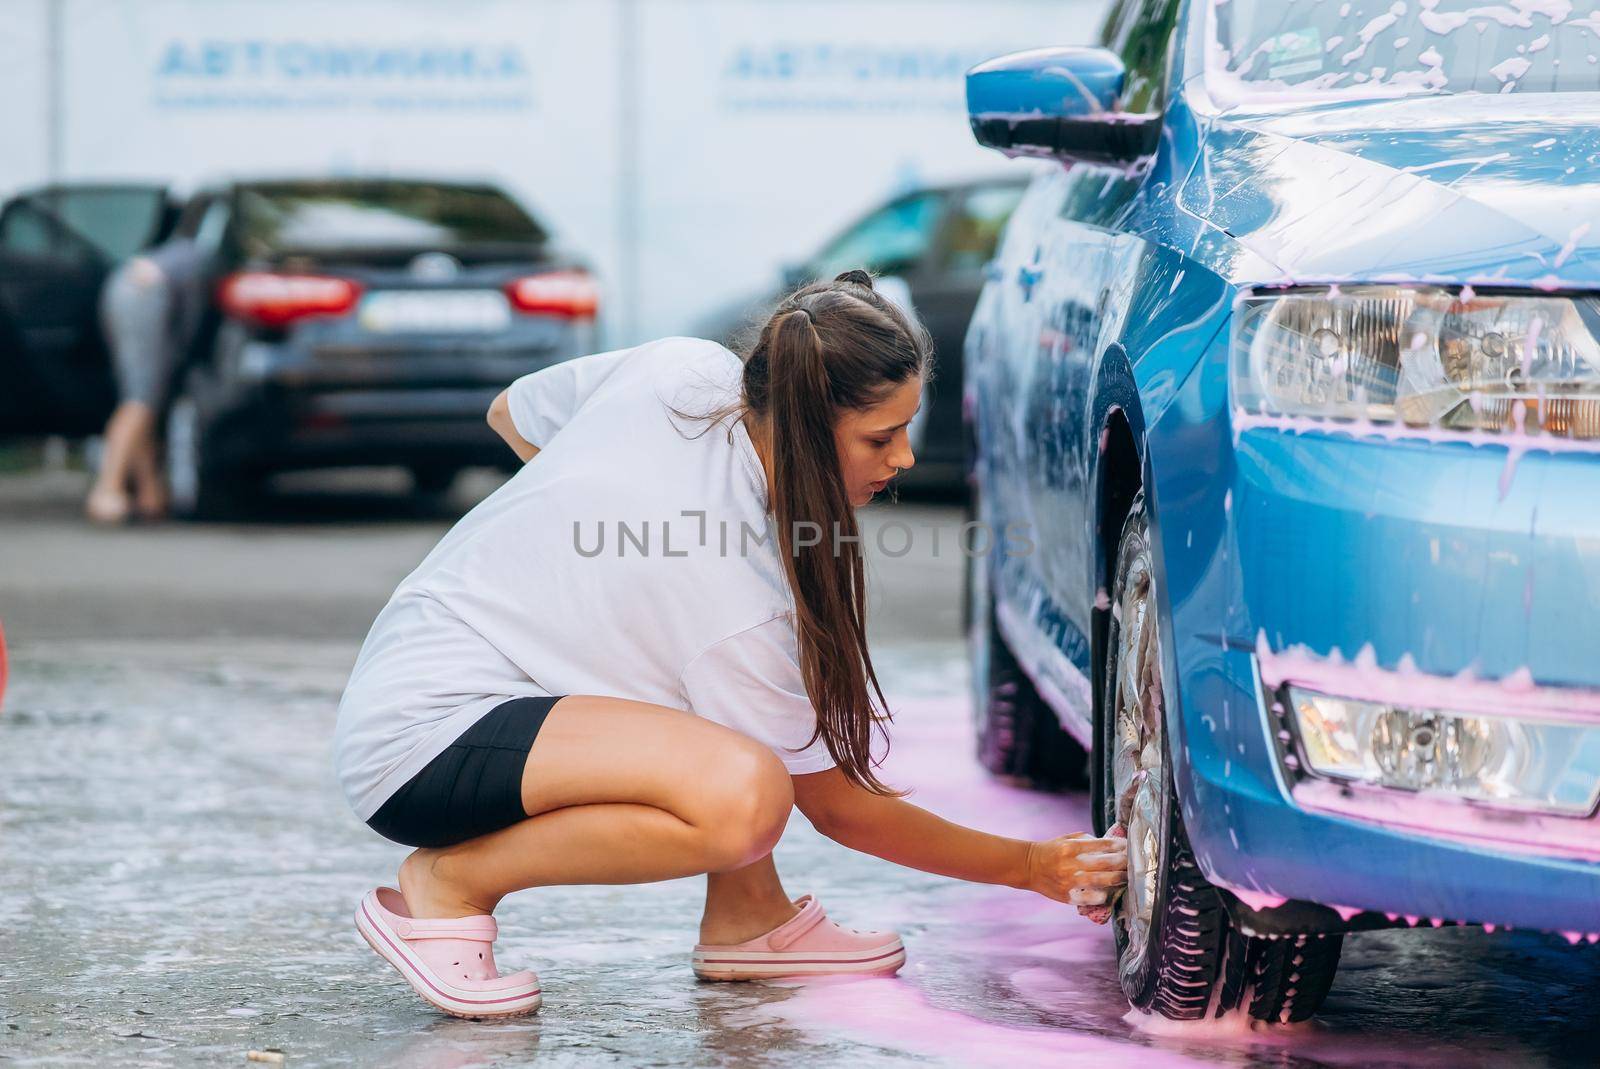 Brunette with two pigtails with a sponge washes the rim of a car